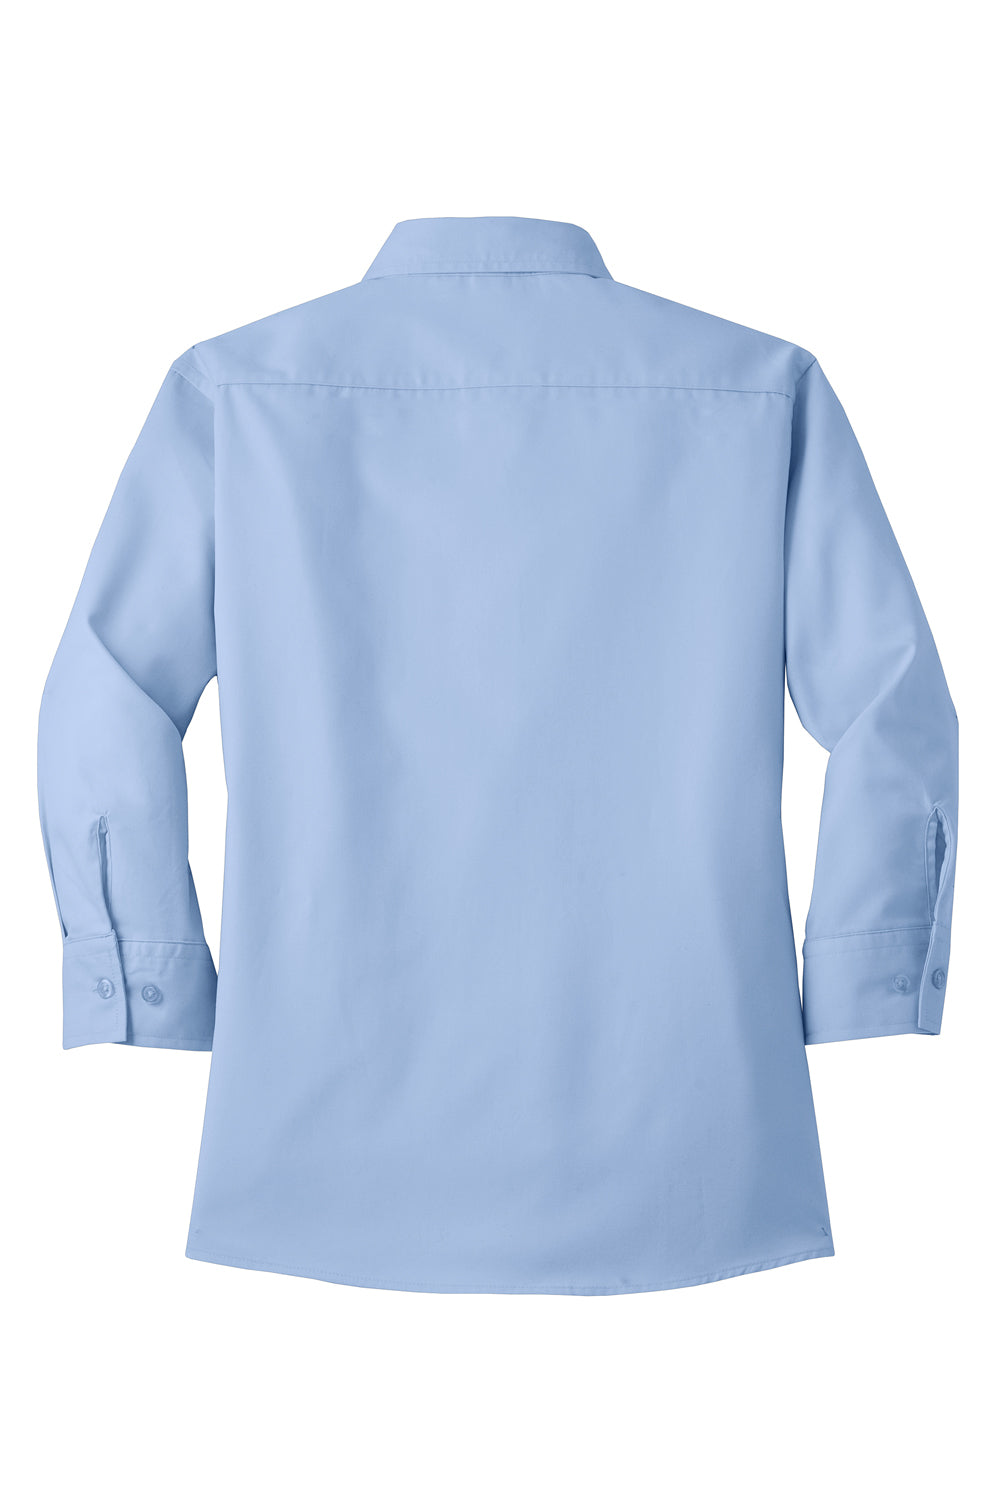 Port Authority L612 Womens Easy Care Wrinkle Resistant 3/4 Sleeve Button Down Shirt Light Blue Flat Back